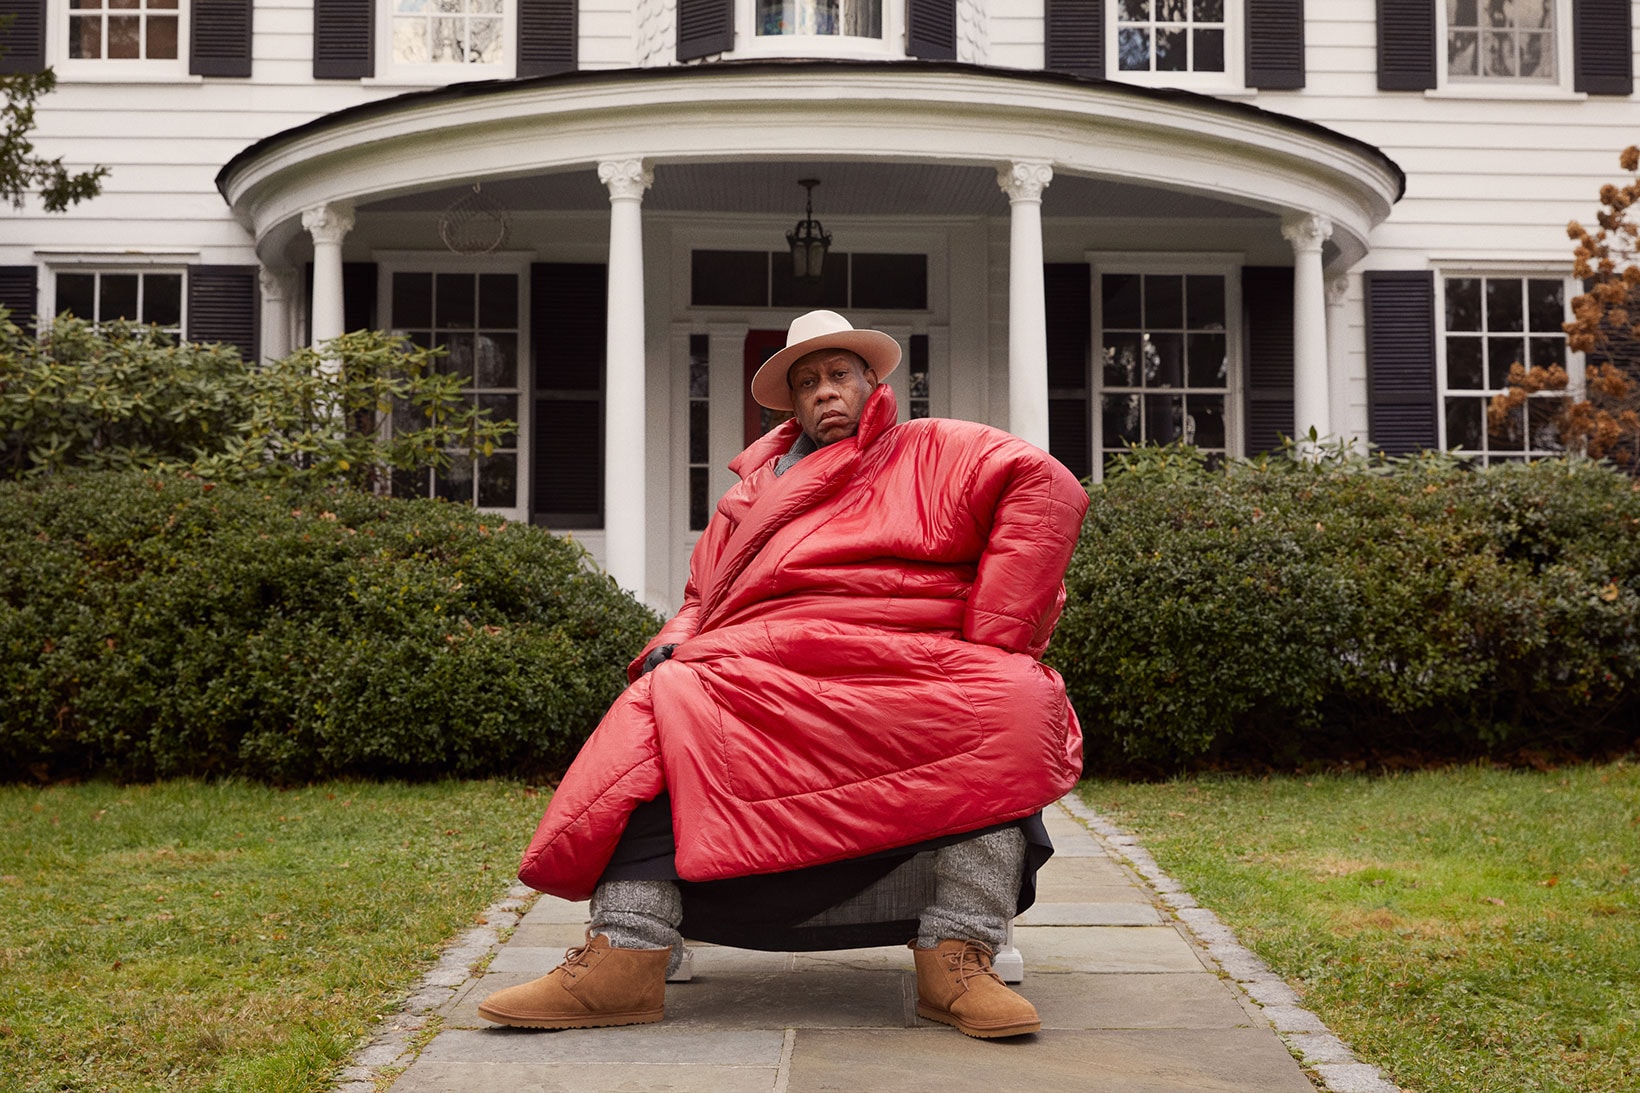 andre leon talley vogue fashion news director ugg spring summer feel campaign neumel chukka red coat jacket outerwear hat house gray socks